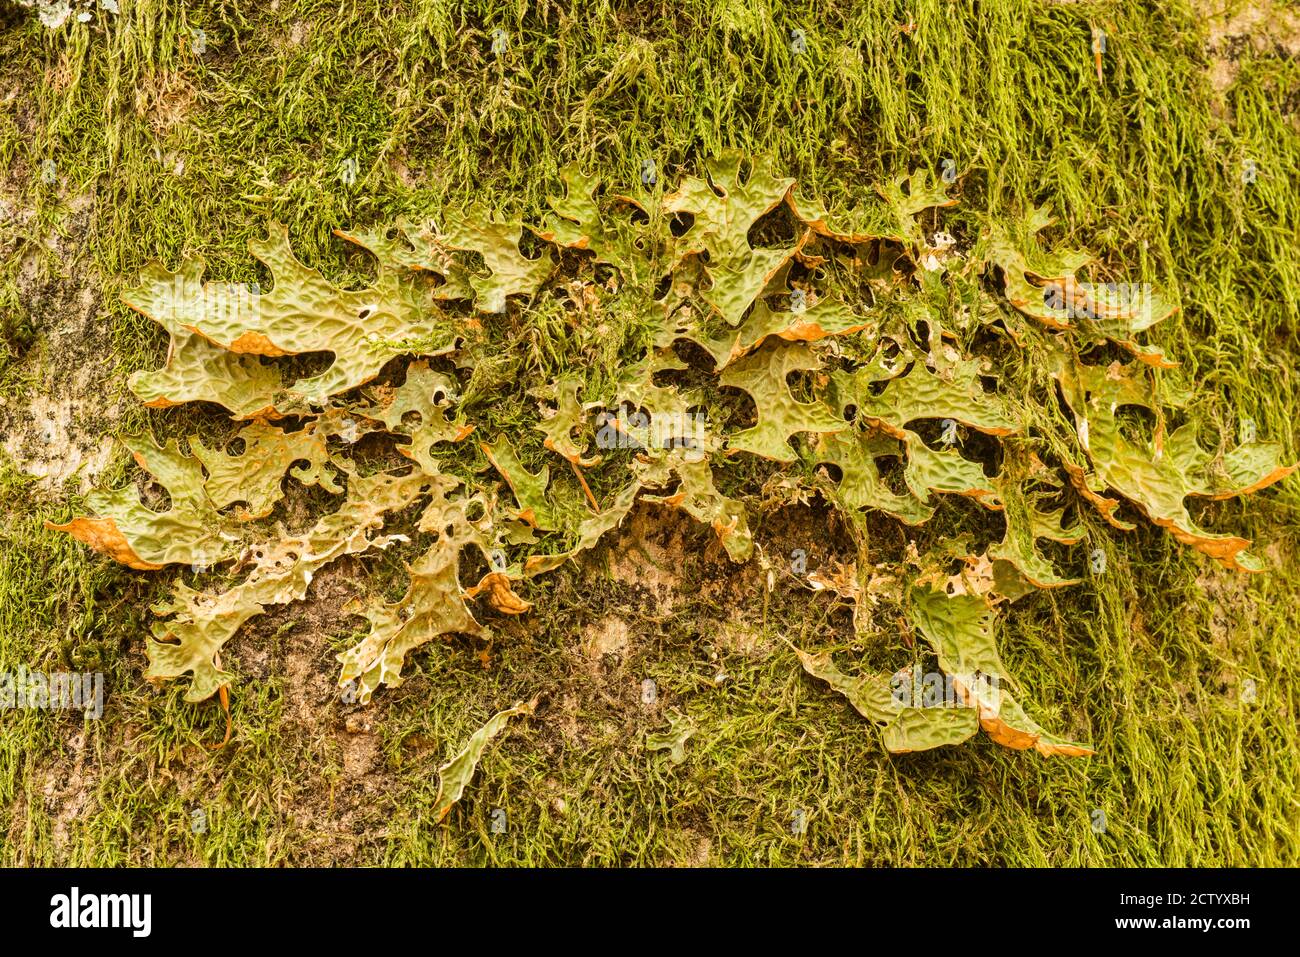 Lobaria pulmonaria, large epiphytic lichen, symbiosis among ascomycete fungus, a green algal partner and a cyanobacterium. Tree lungwort, lung moss, s Stock Photo